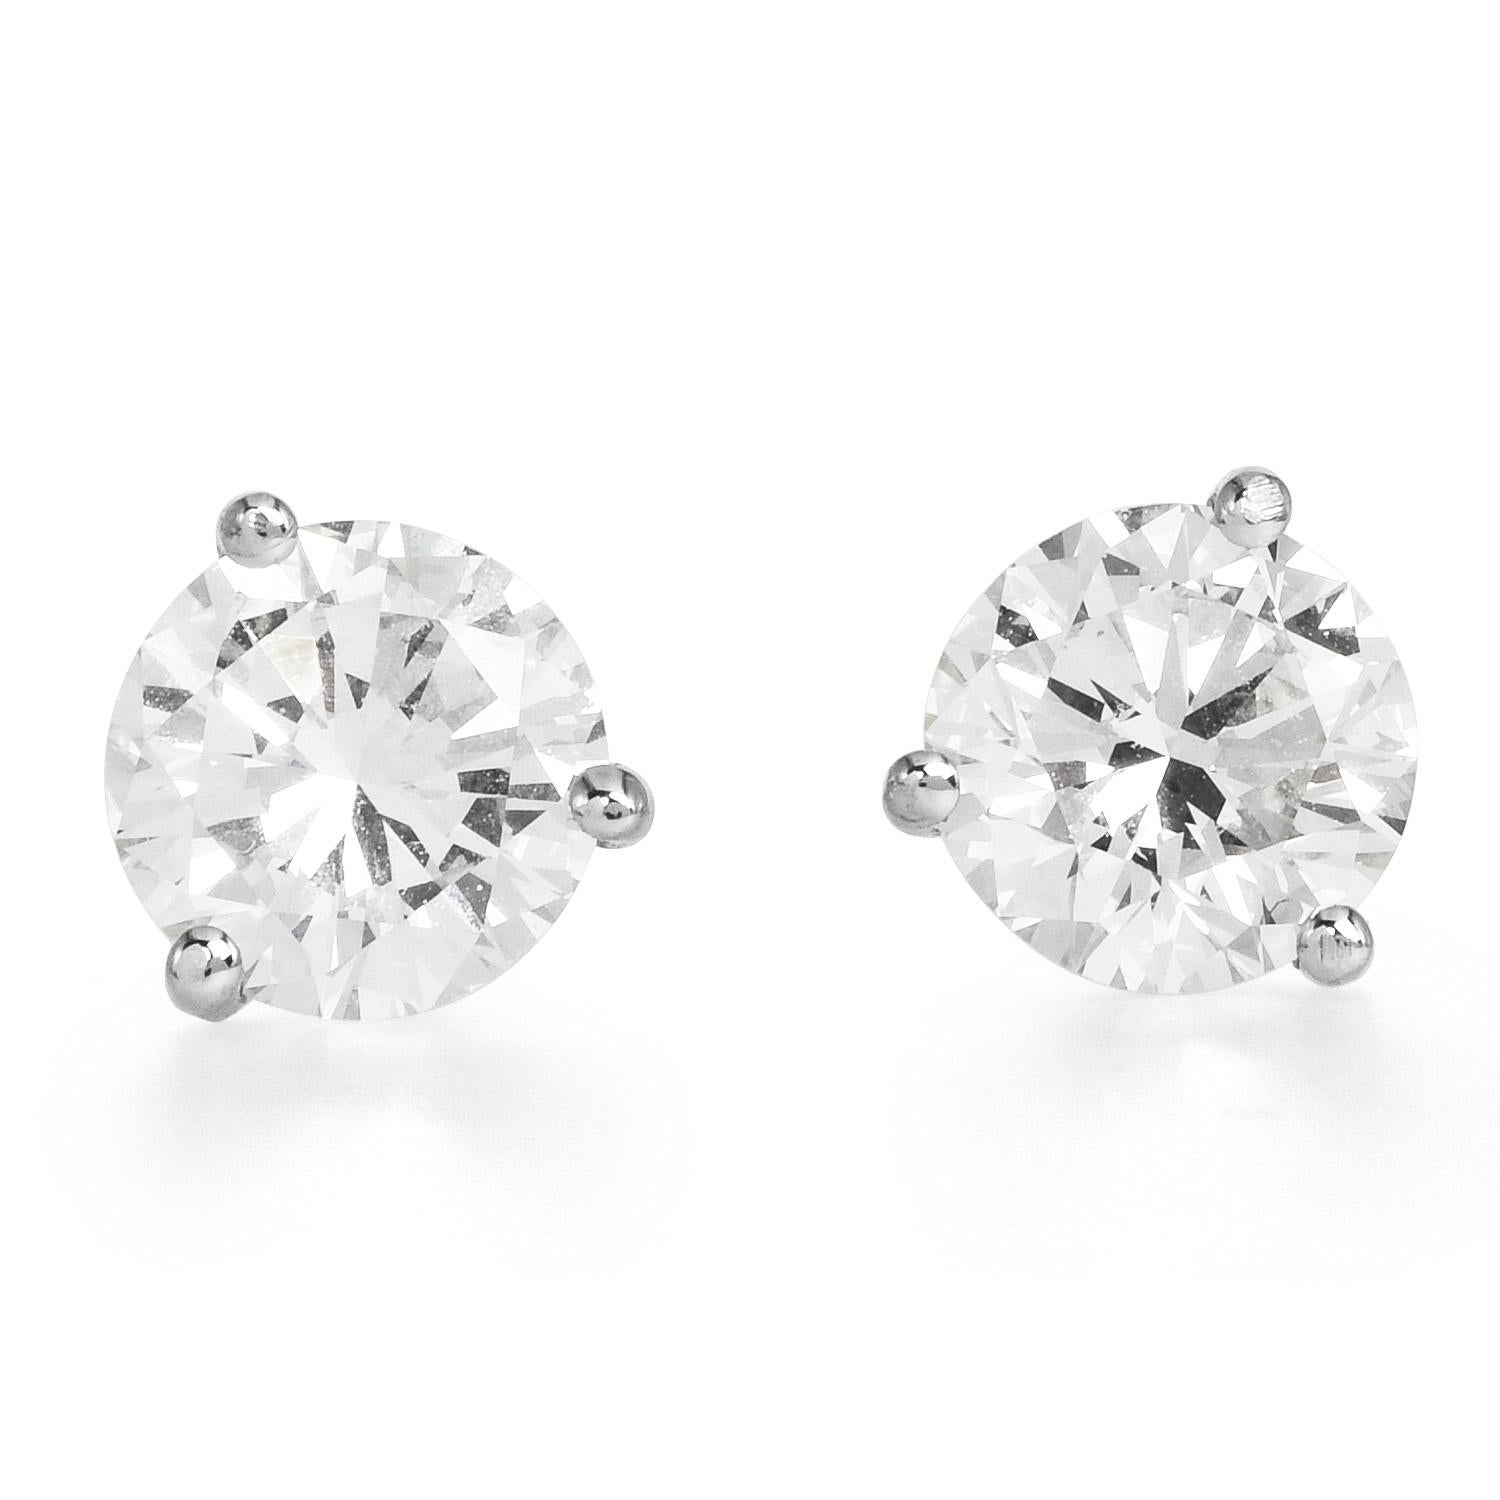 These classic martini diamond studs are a must-have for every diamond lover collection!

Set in a chick martini set tree prong style, crafted in 18K white gold

and contain 2 round faceted diamonds

weighing cumulatively appx. 2.45 carats and 

are